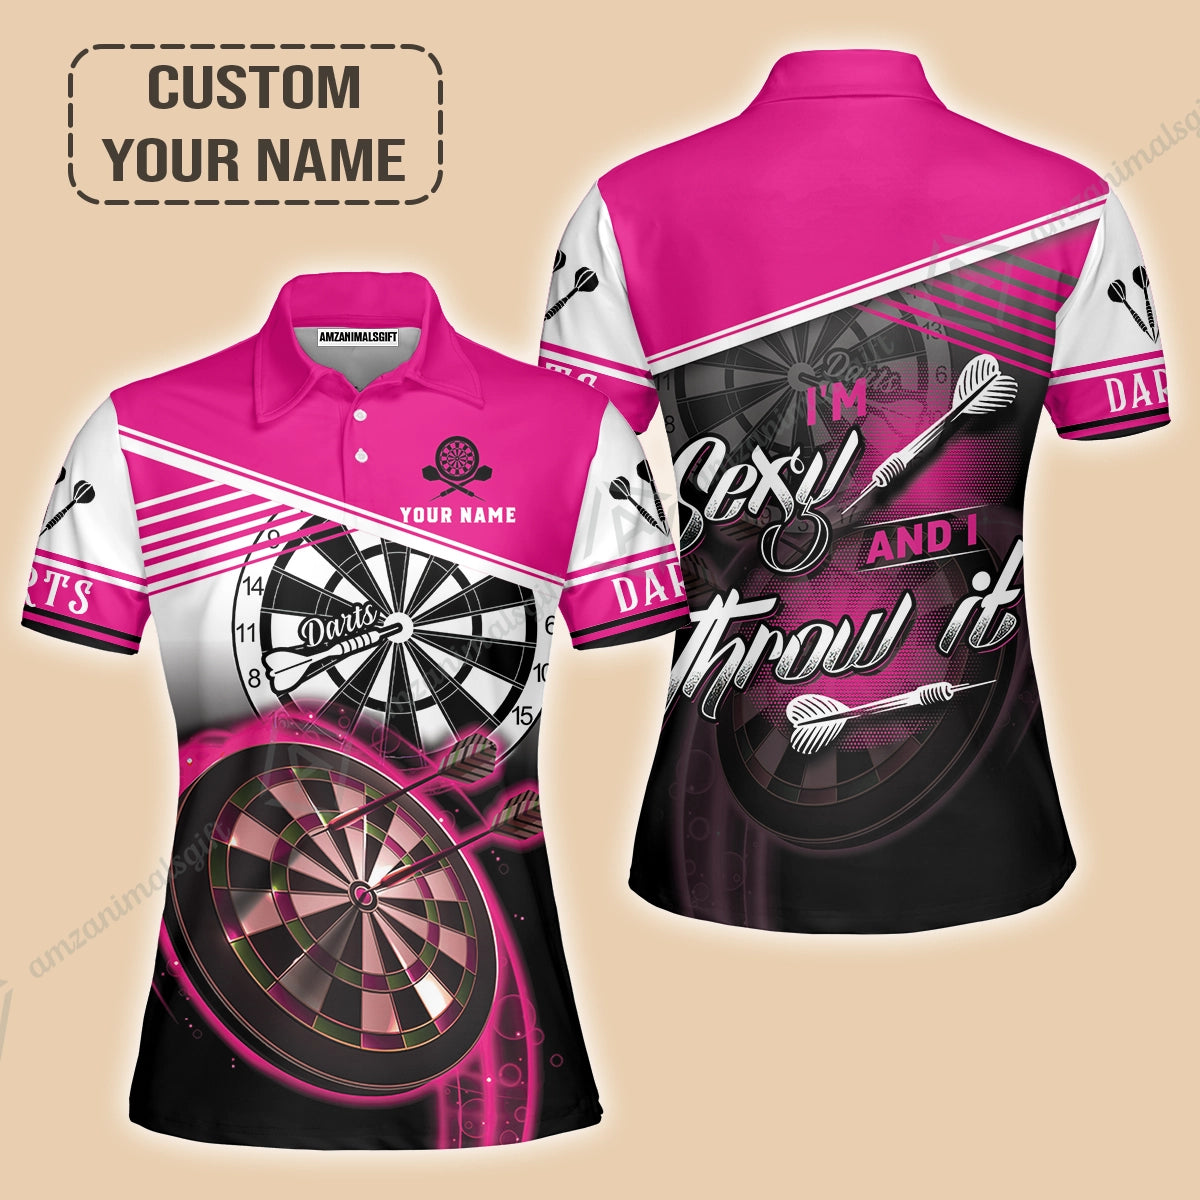 Personalized Darts Women Polo Shirt, Darts Pink Color Custom Name Polo Shirt I'm Sexy And I Throw It, Outfits For Darts Players, Darts Team